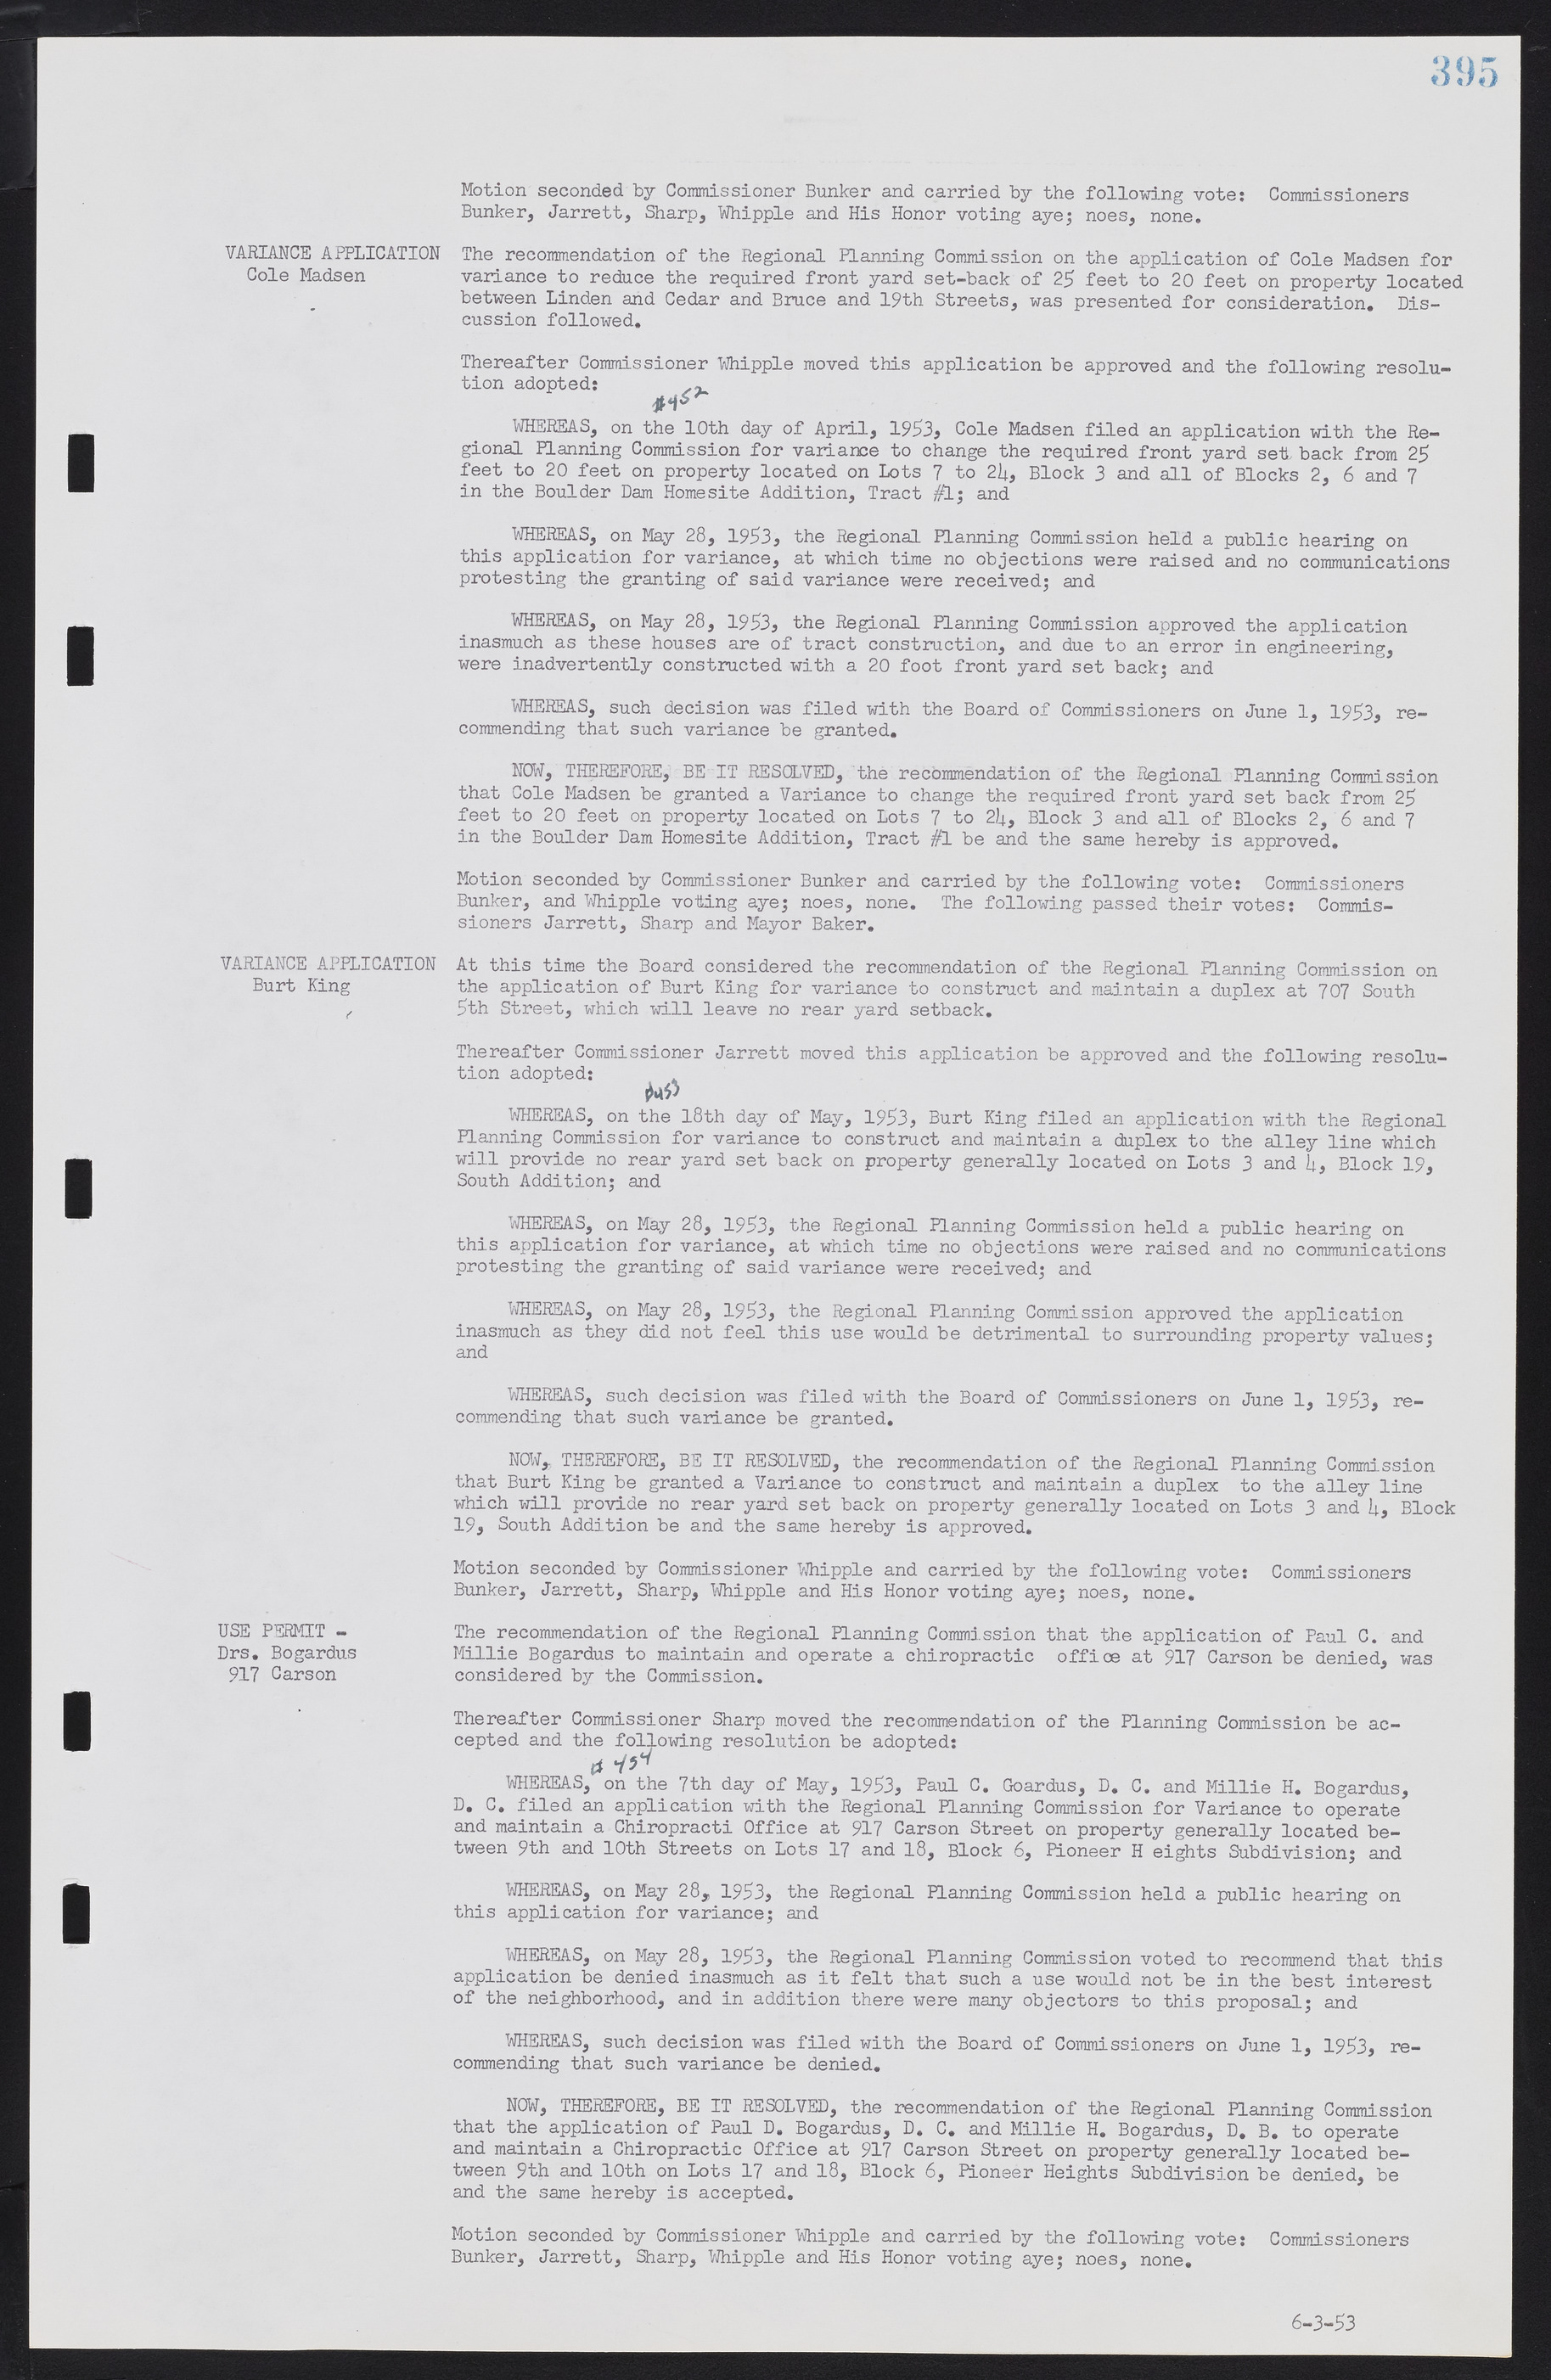 Las Vegas City Commission Minutes, May 26, 1952 to February 17, 1954, lvc000008-423